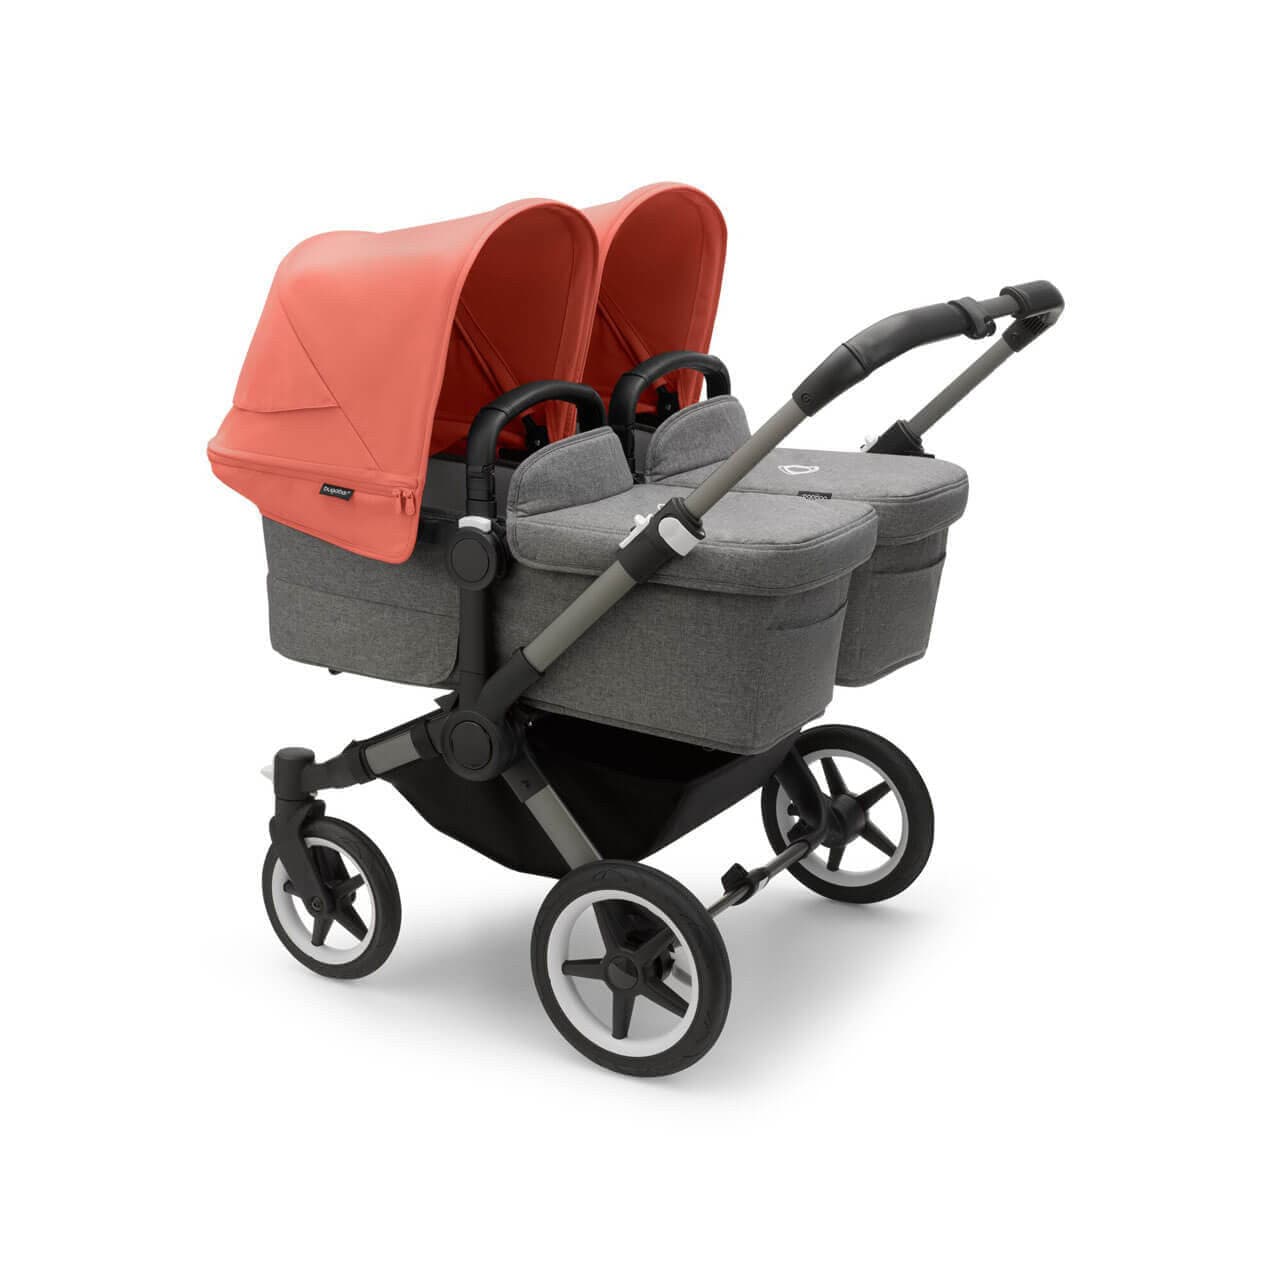 Bugaboo Donkey 5 Twin Pushchair on Graphite/Grey Chassis - Choose Your Colour - Sunrise Red | For Your Little One